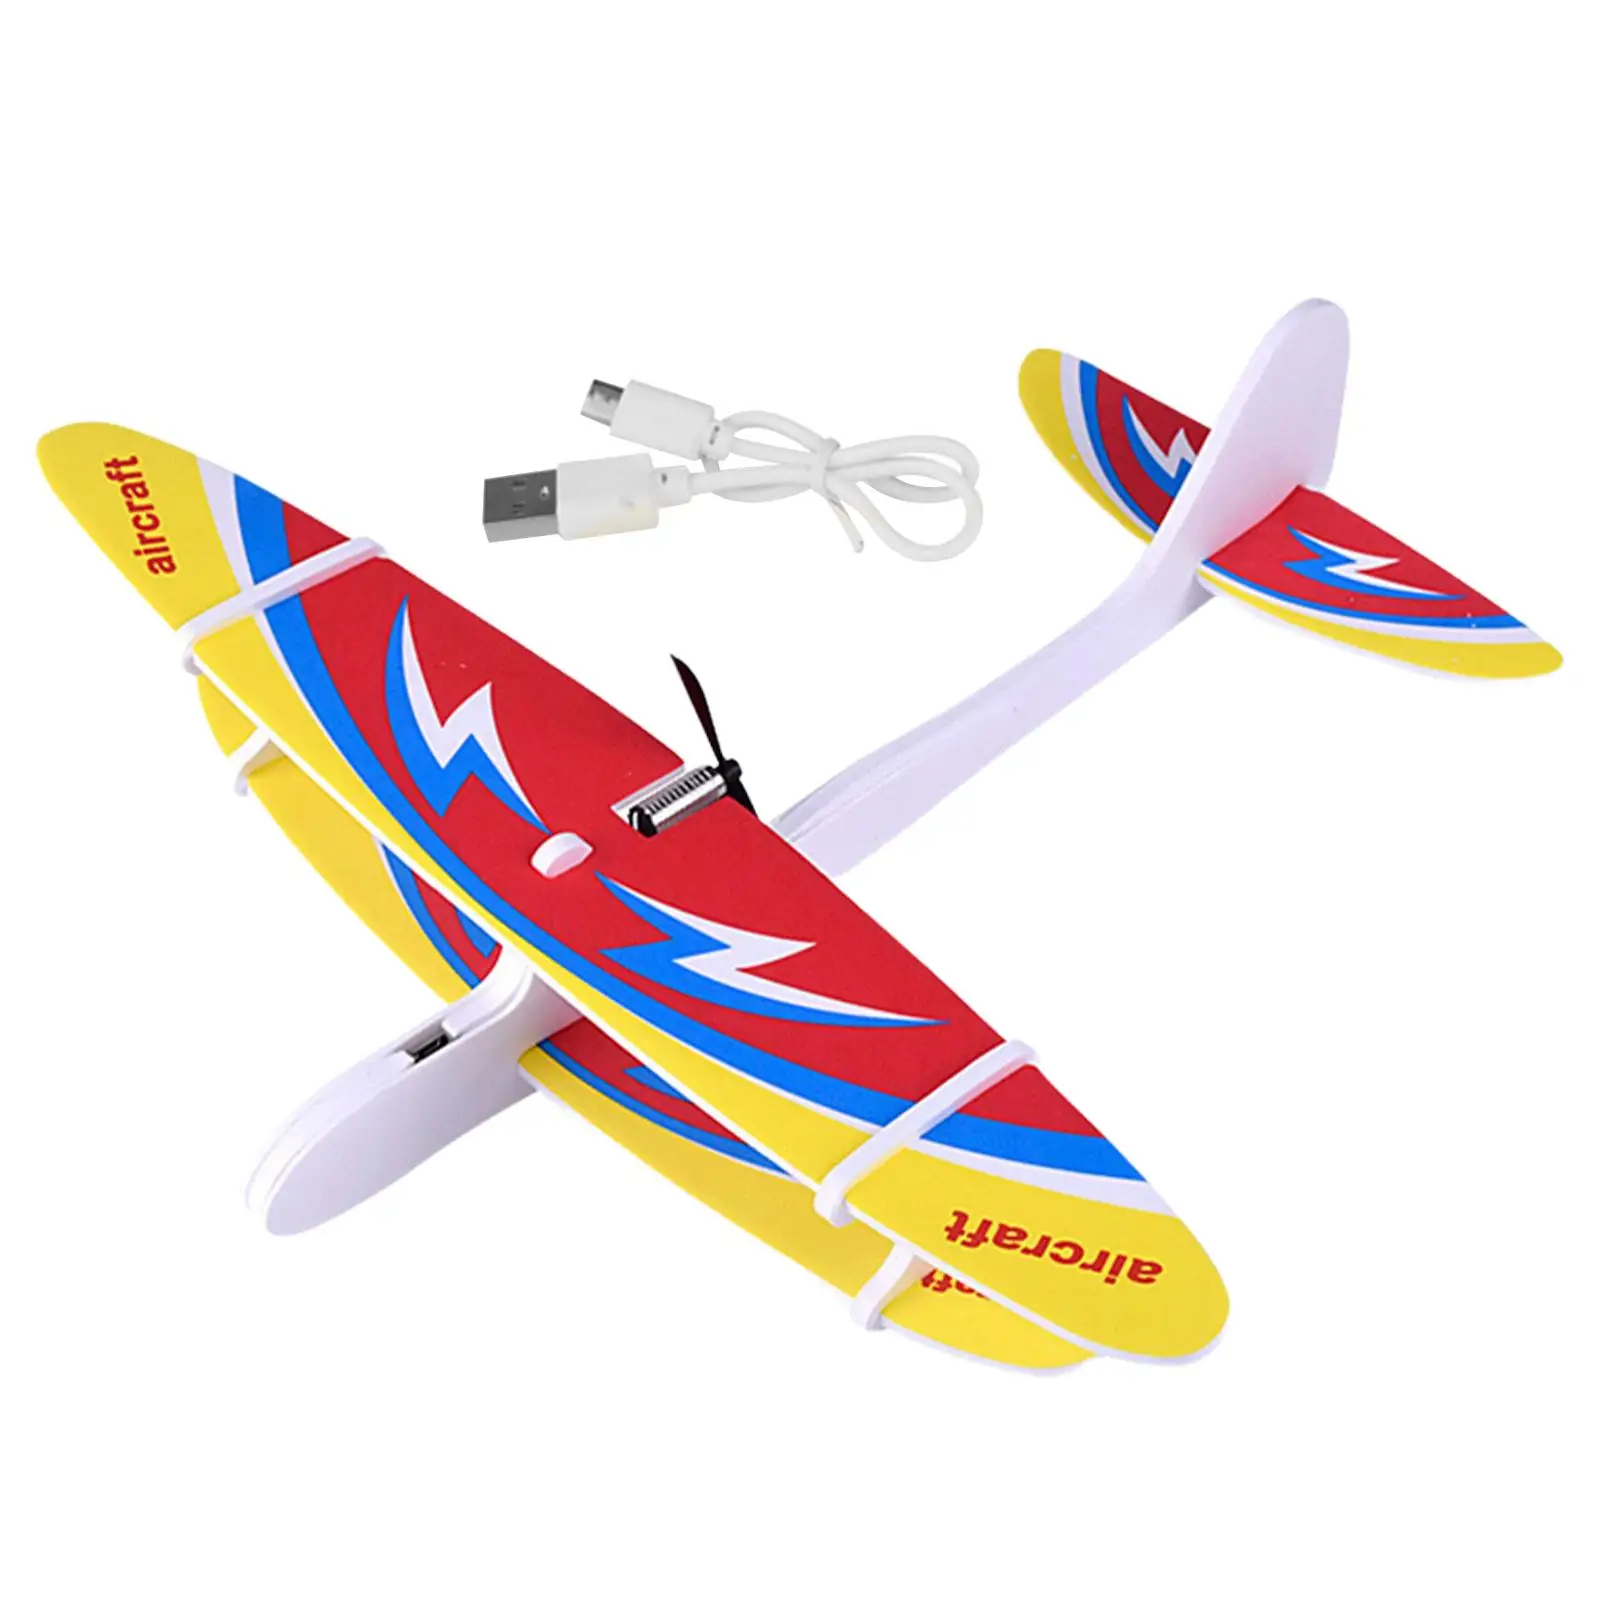 foam Electric Hand Throwing Glider Plane Outdoor Sport game toy for Adults